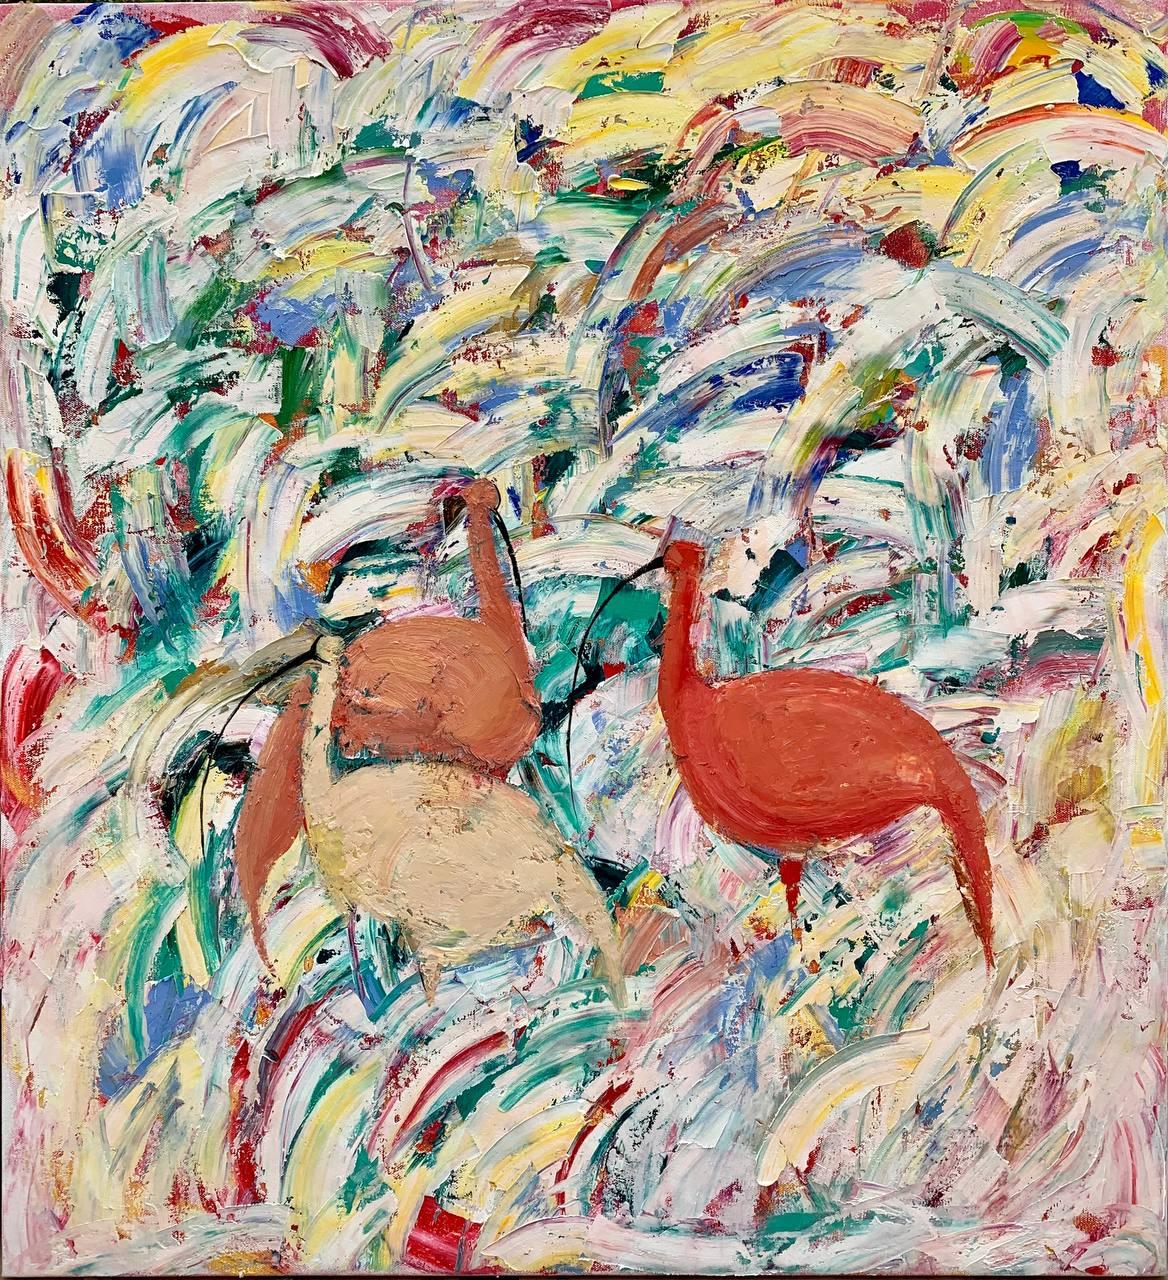 "Ibises 2" Abstract Oil Painting 43" x 43" in by Sanjar Djabbarov

ABOUT 
Sanjar Djabbarov was born in Gulistan, the capital of the Sirdaria Province in eastern Uzbekistan. The avant-garde artist studied Industrial Design at the National Institute